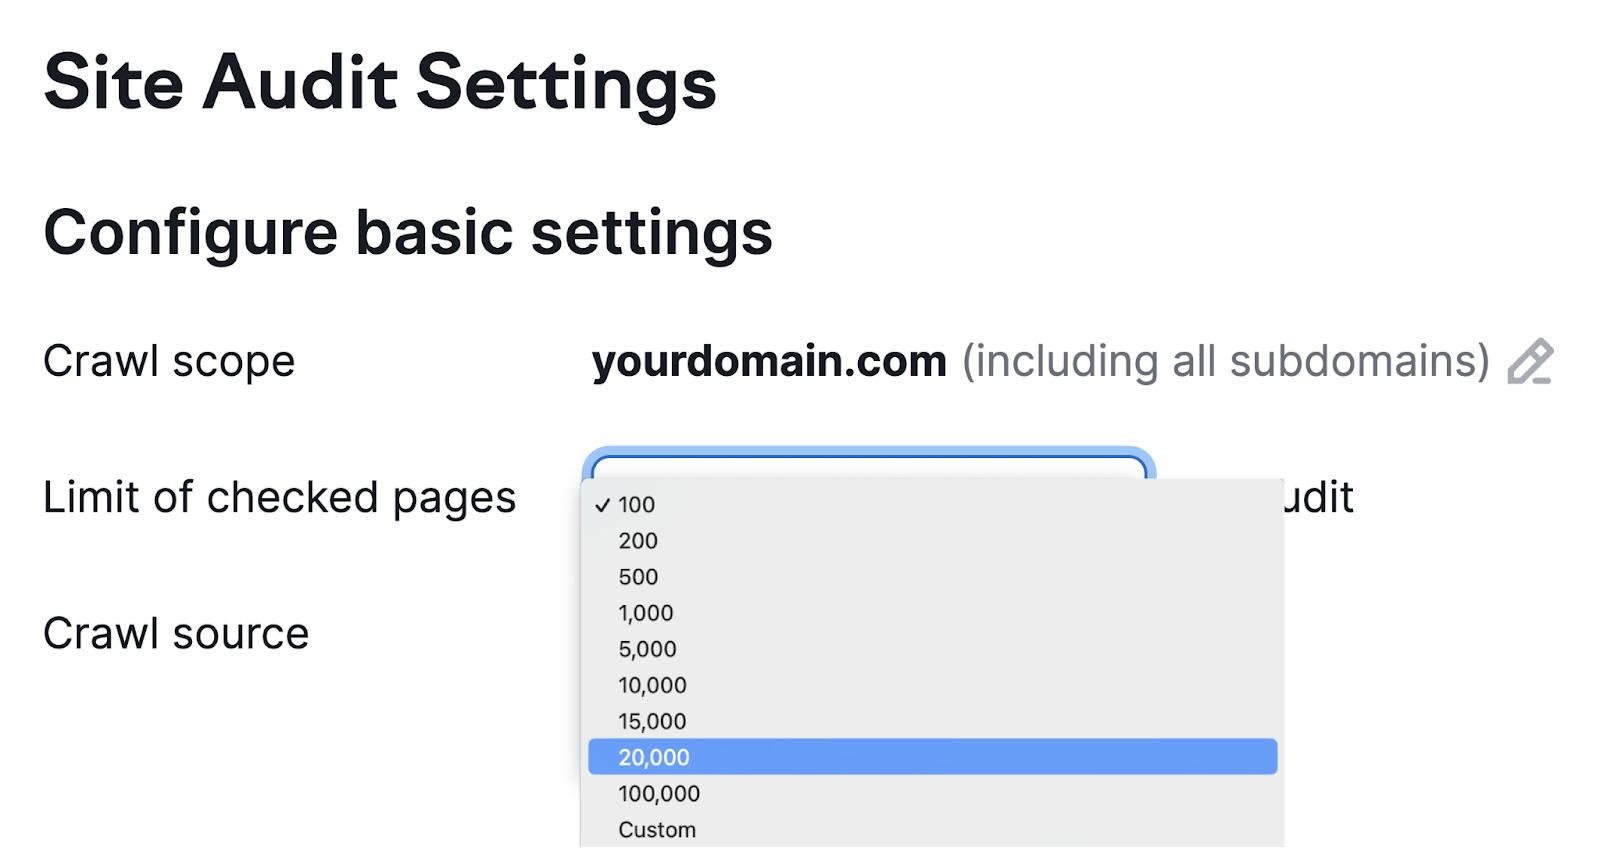 "20 000" selected under "Limit of checked pages" drop-down menu